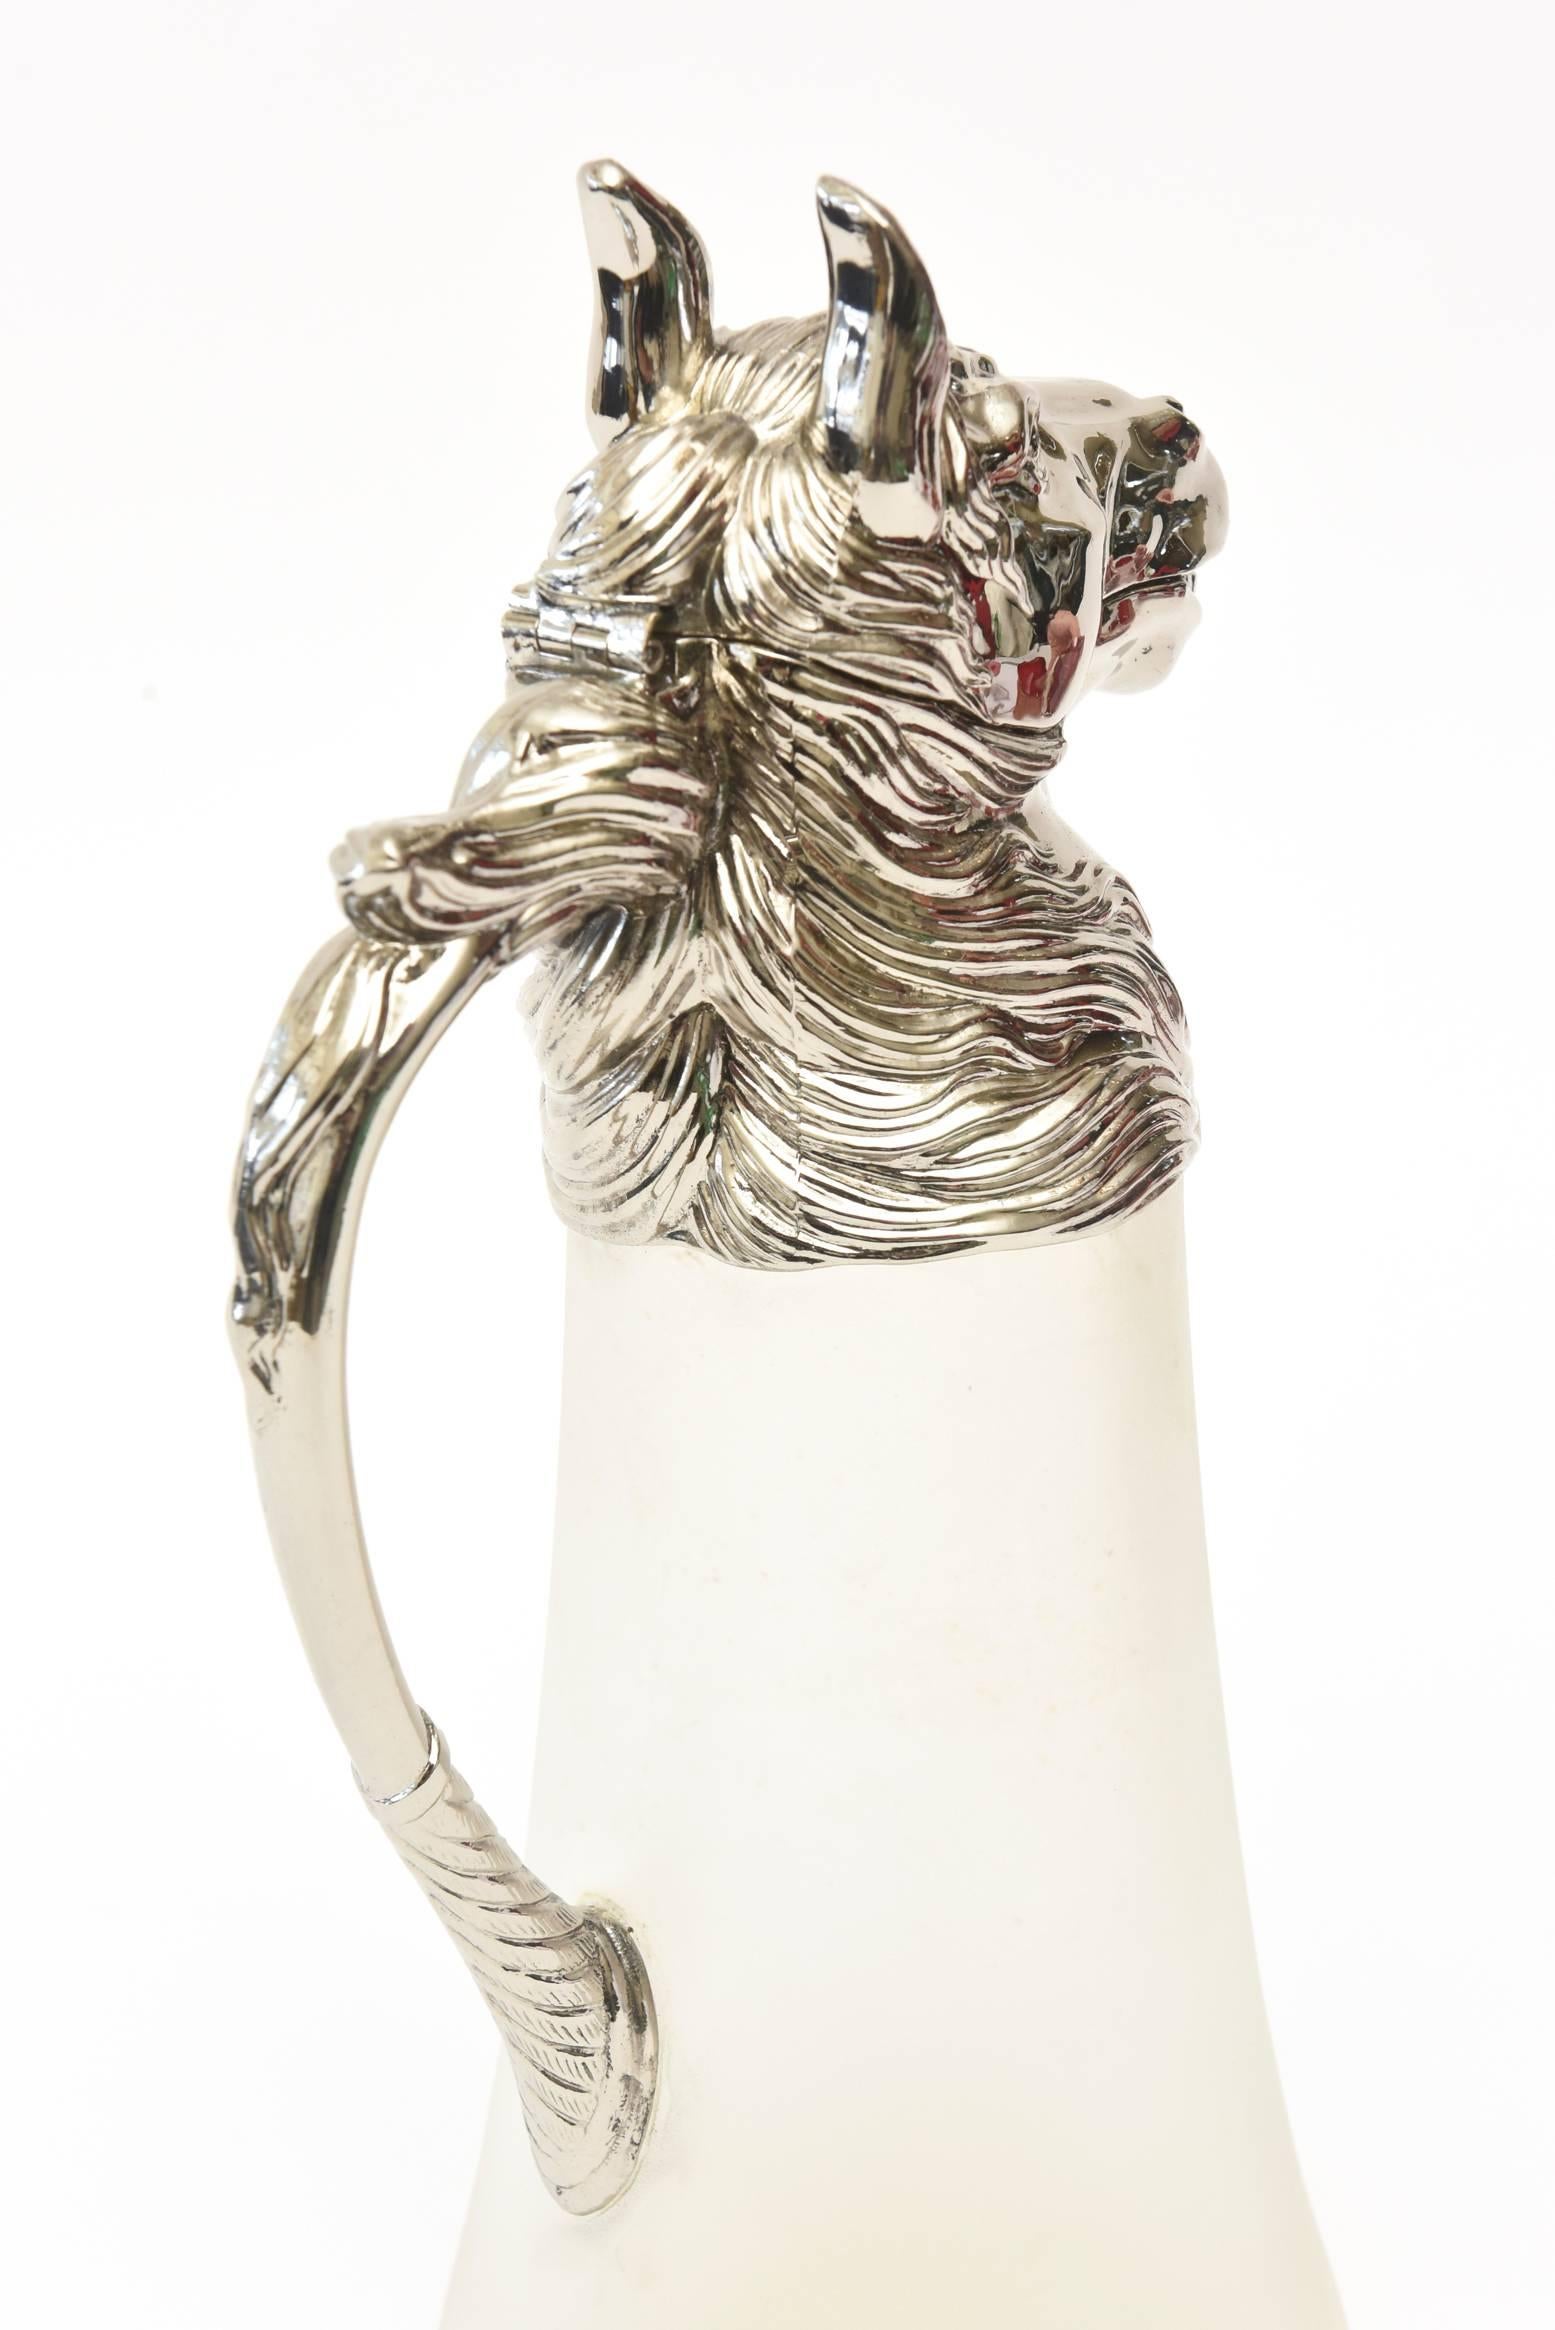 Américain Nickel-Plated and Frosted Glass Horse Decanter Pitcher Barware Vintage en vente